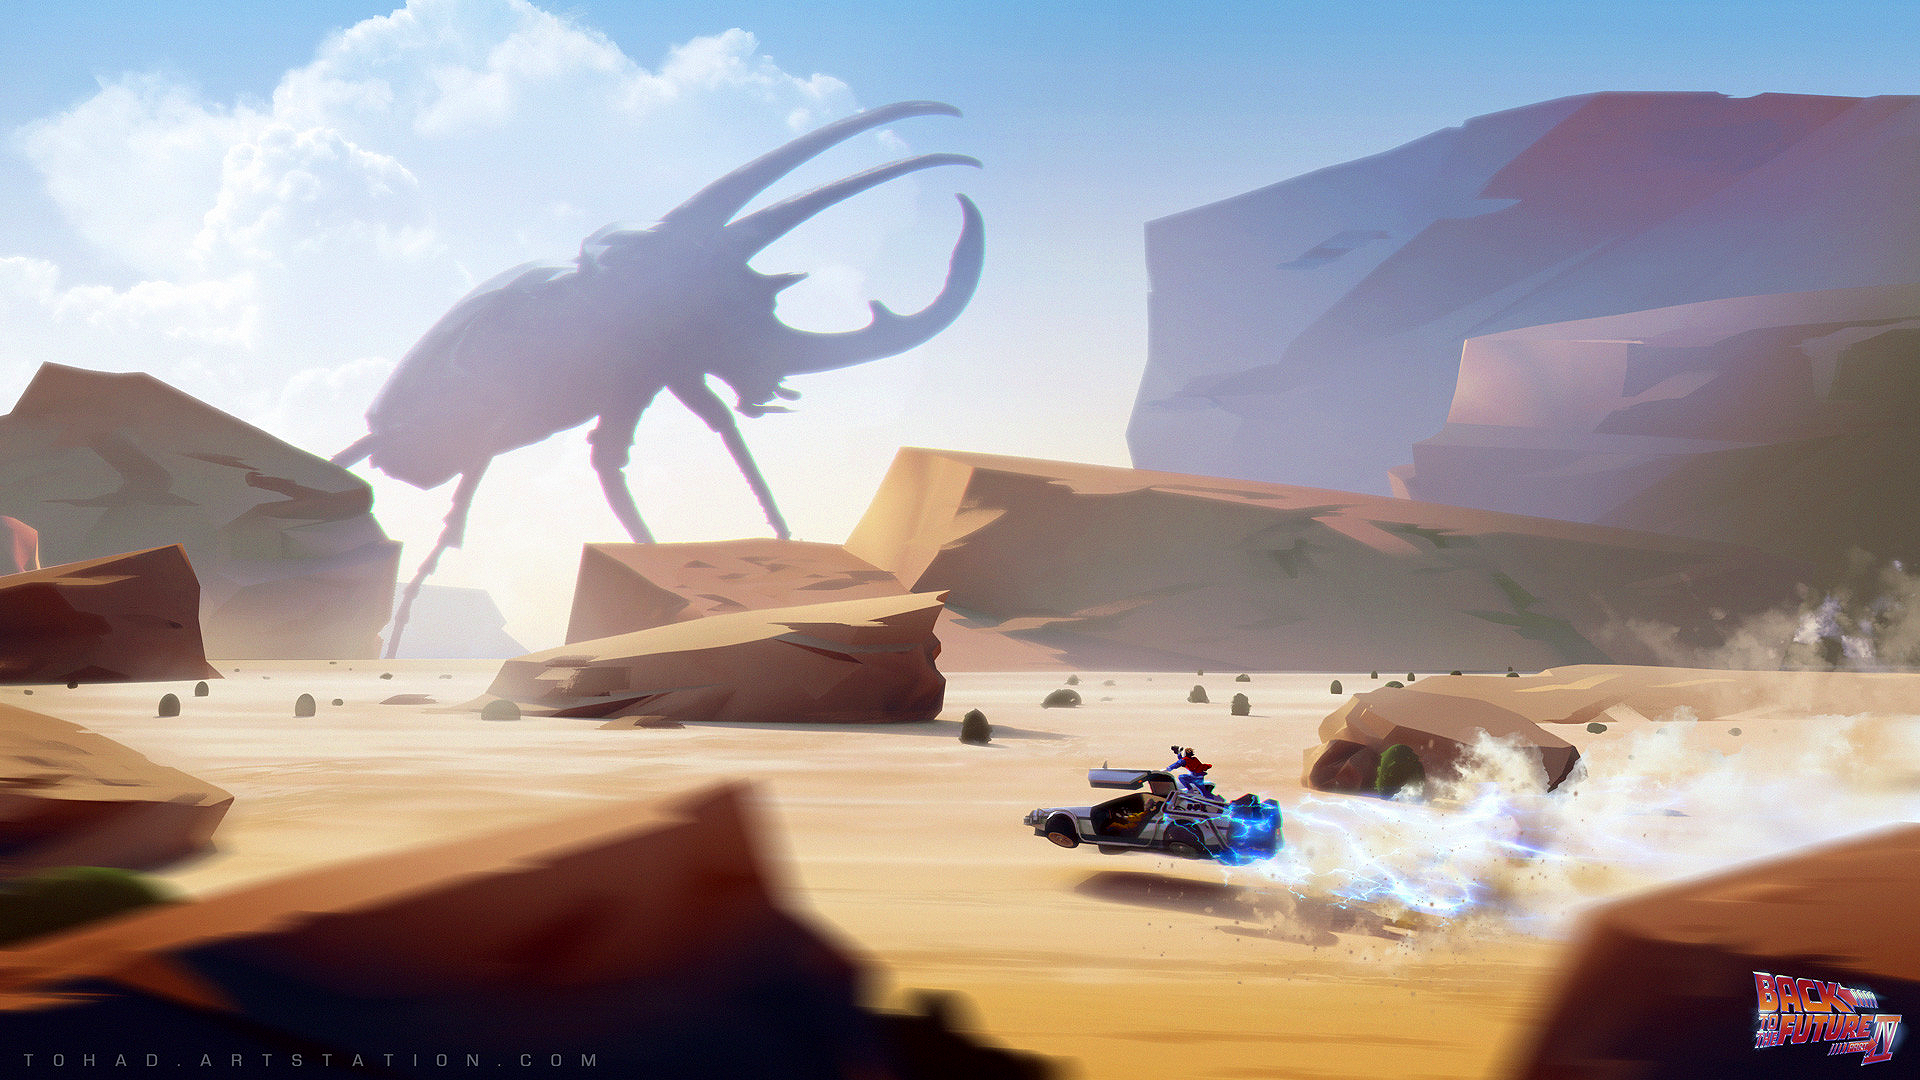 General 1920x1080 Sylvain Sarrailh giant creature insect Back to the Future flying car DeLorean lightning beetles desert digital art